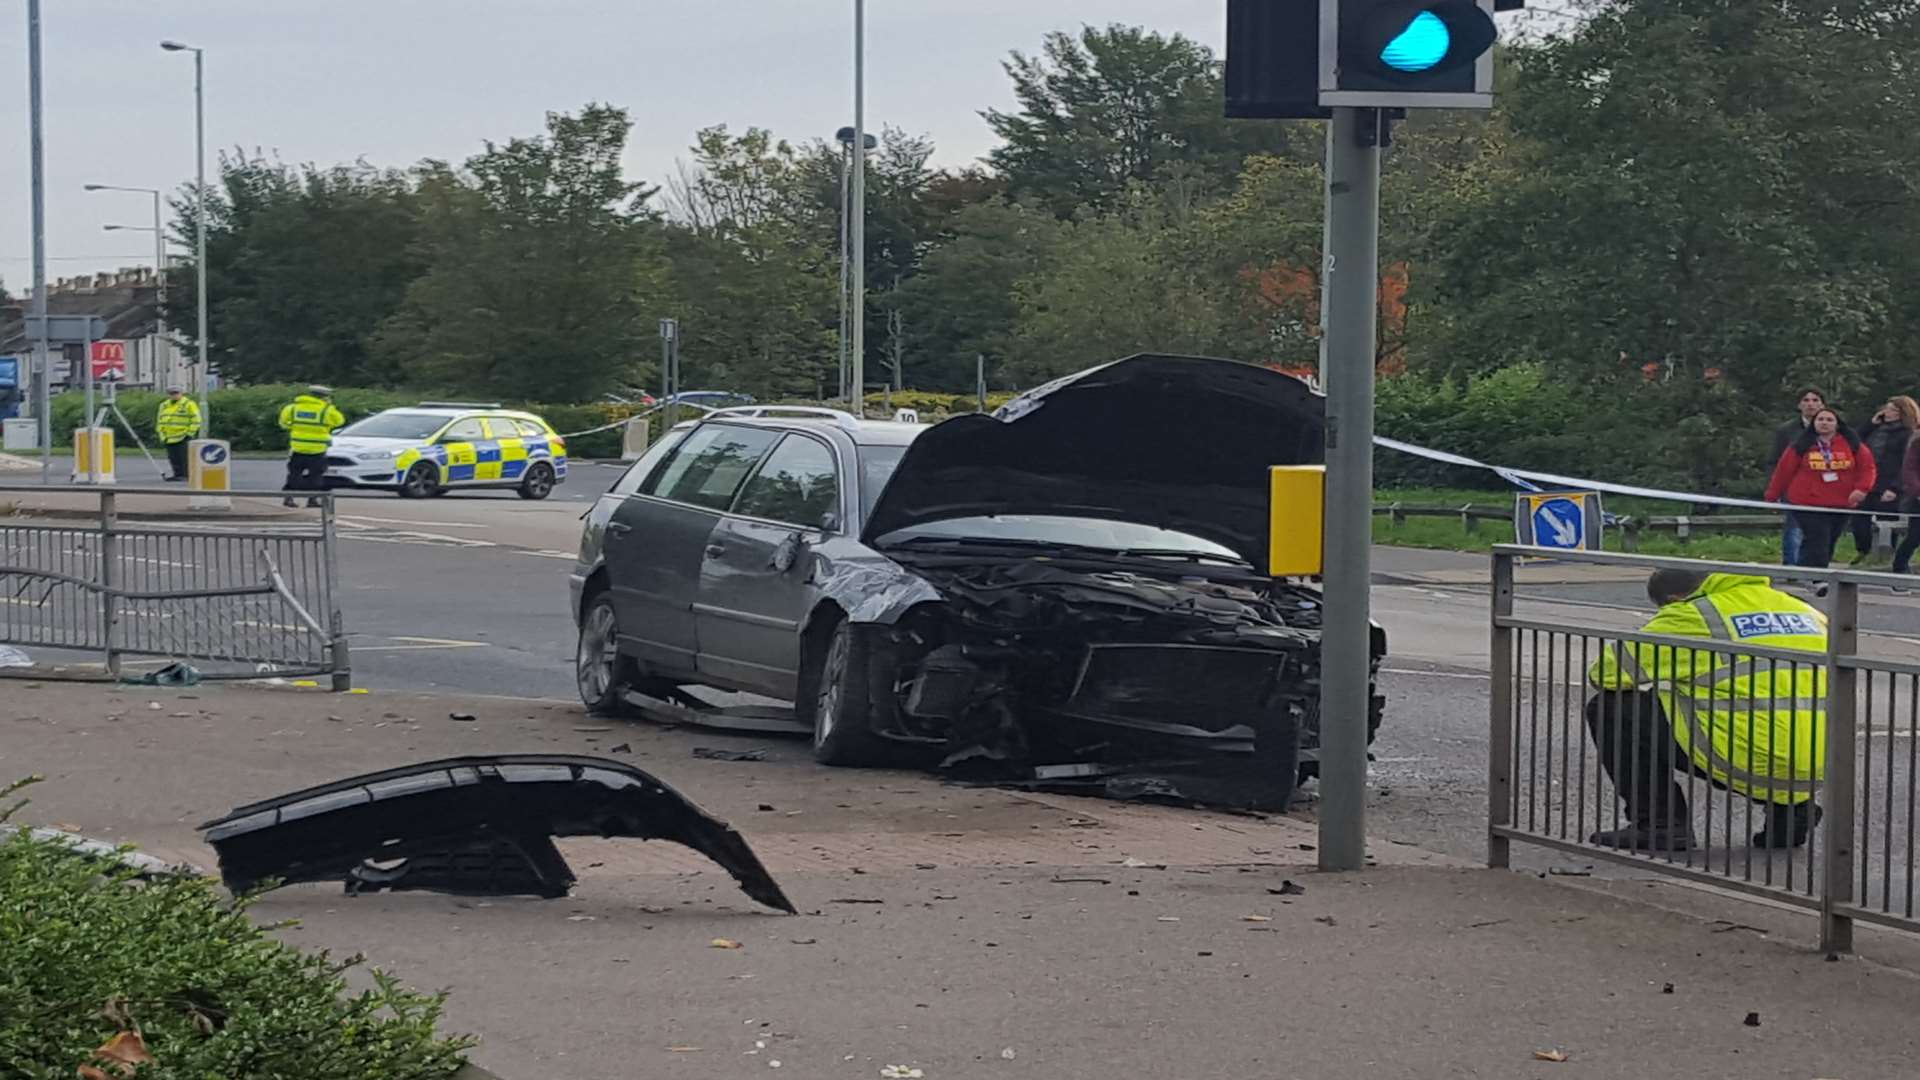 The wreckage of the car in Sturry Road